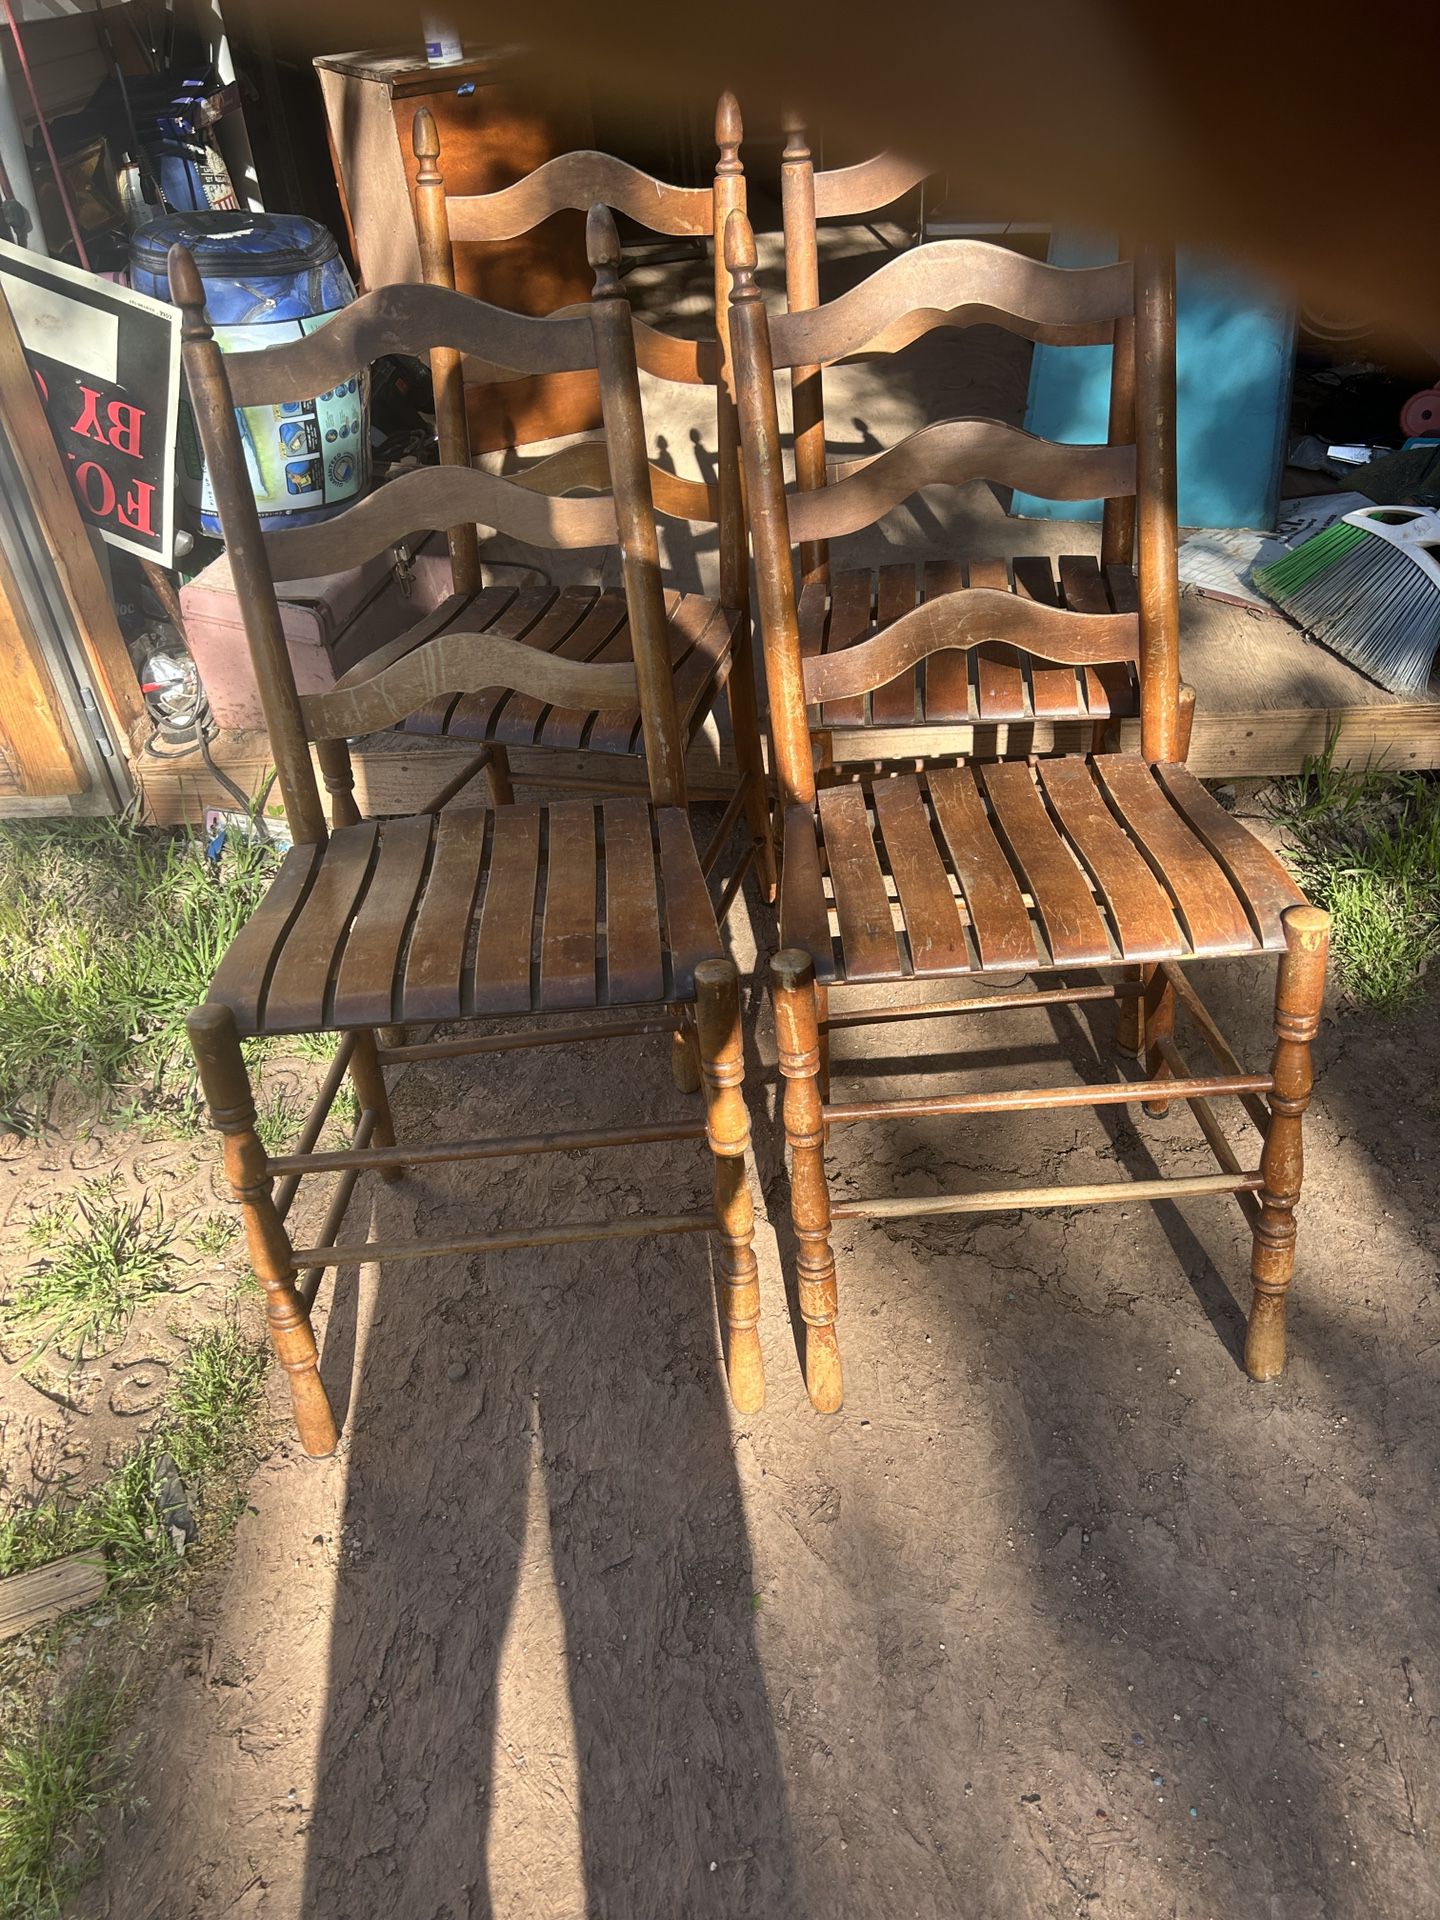 Set Of 4 Vintage Chairs 